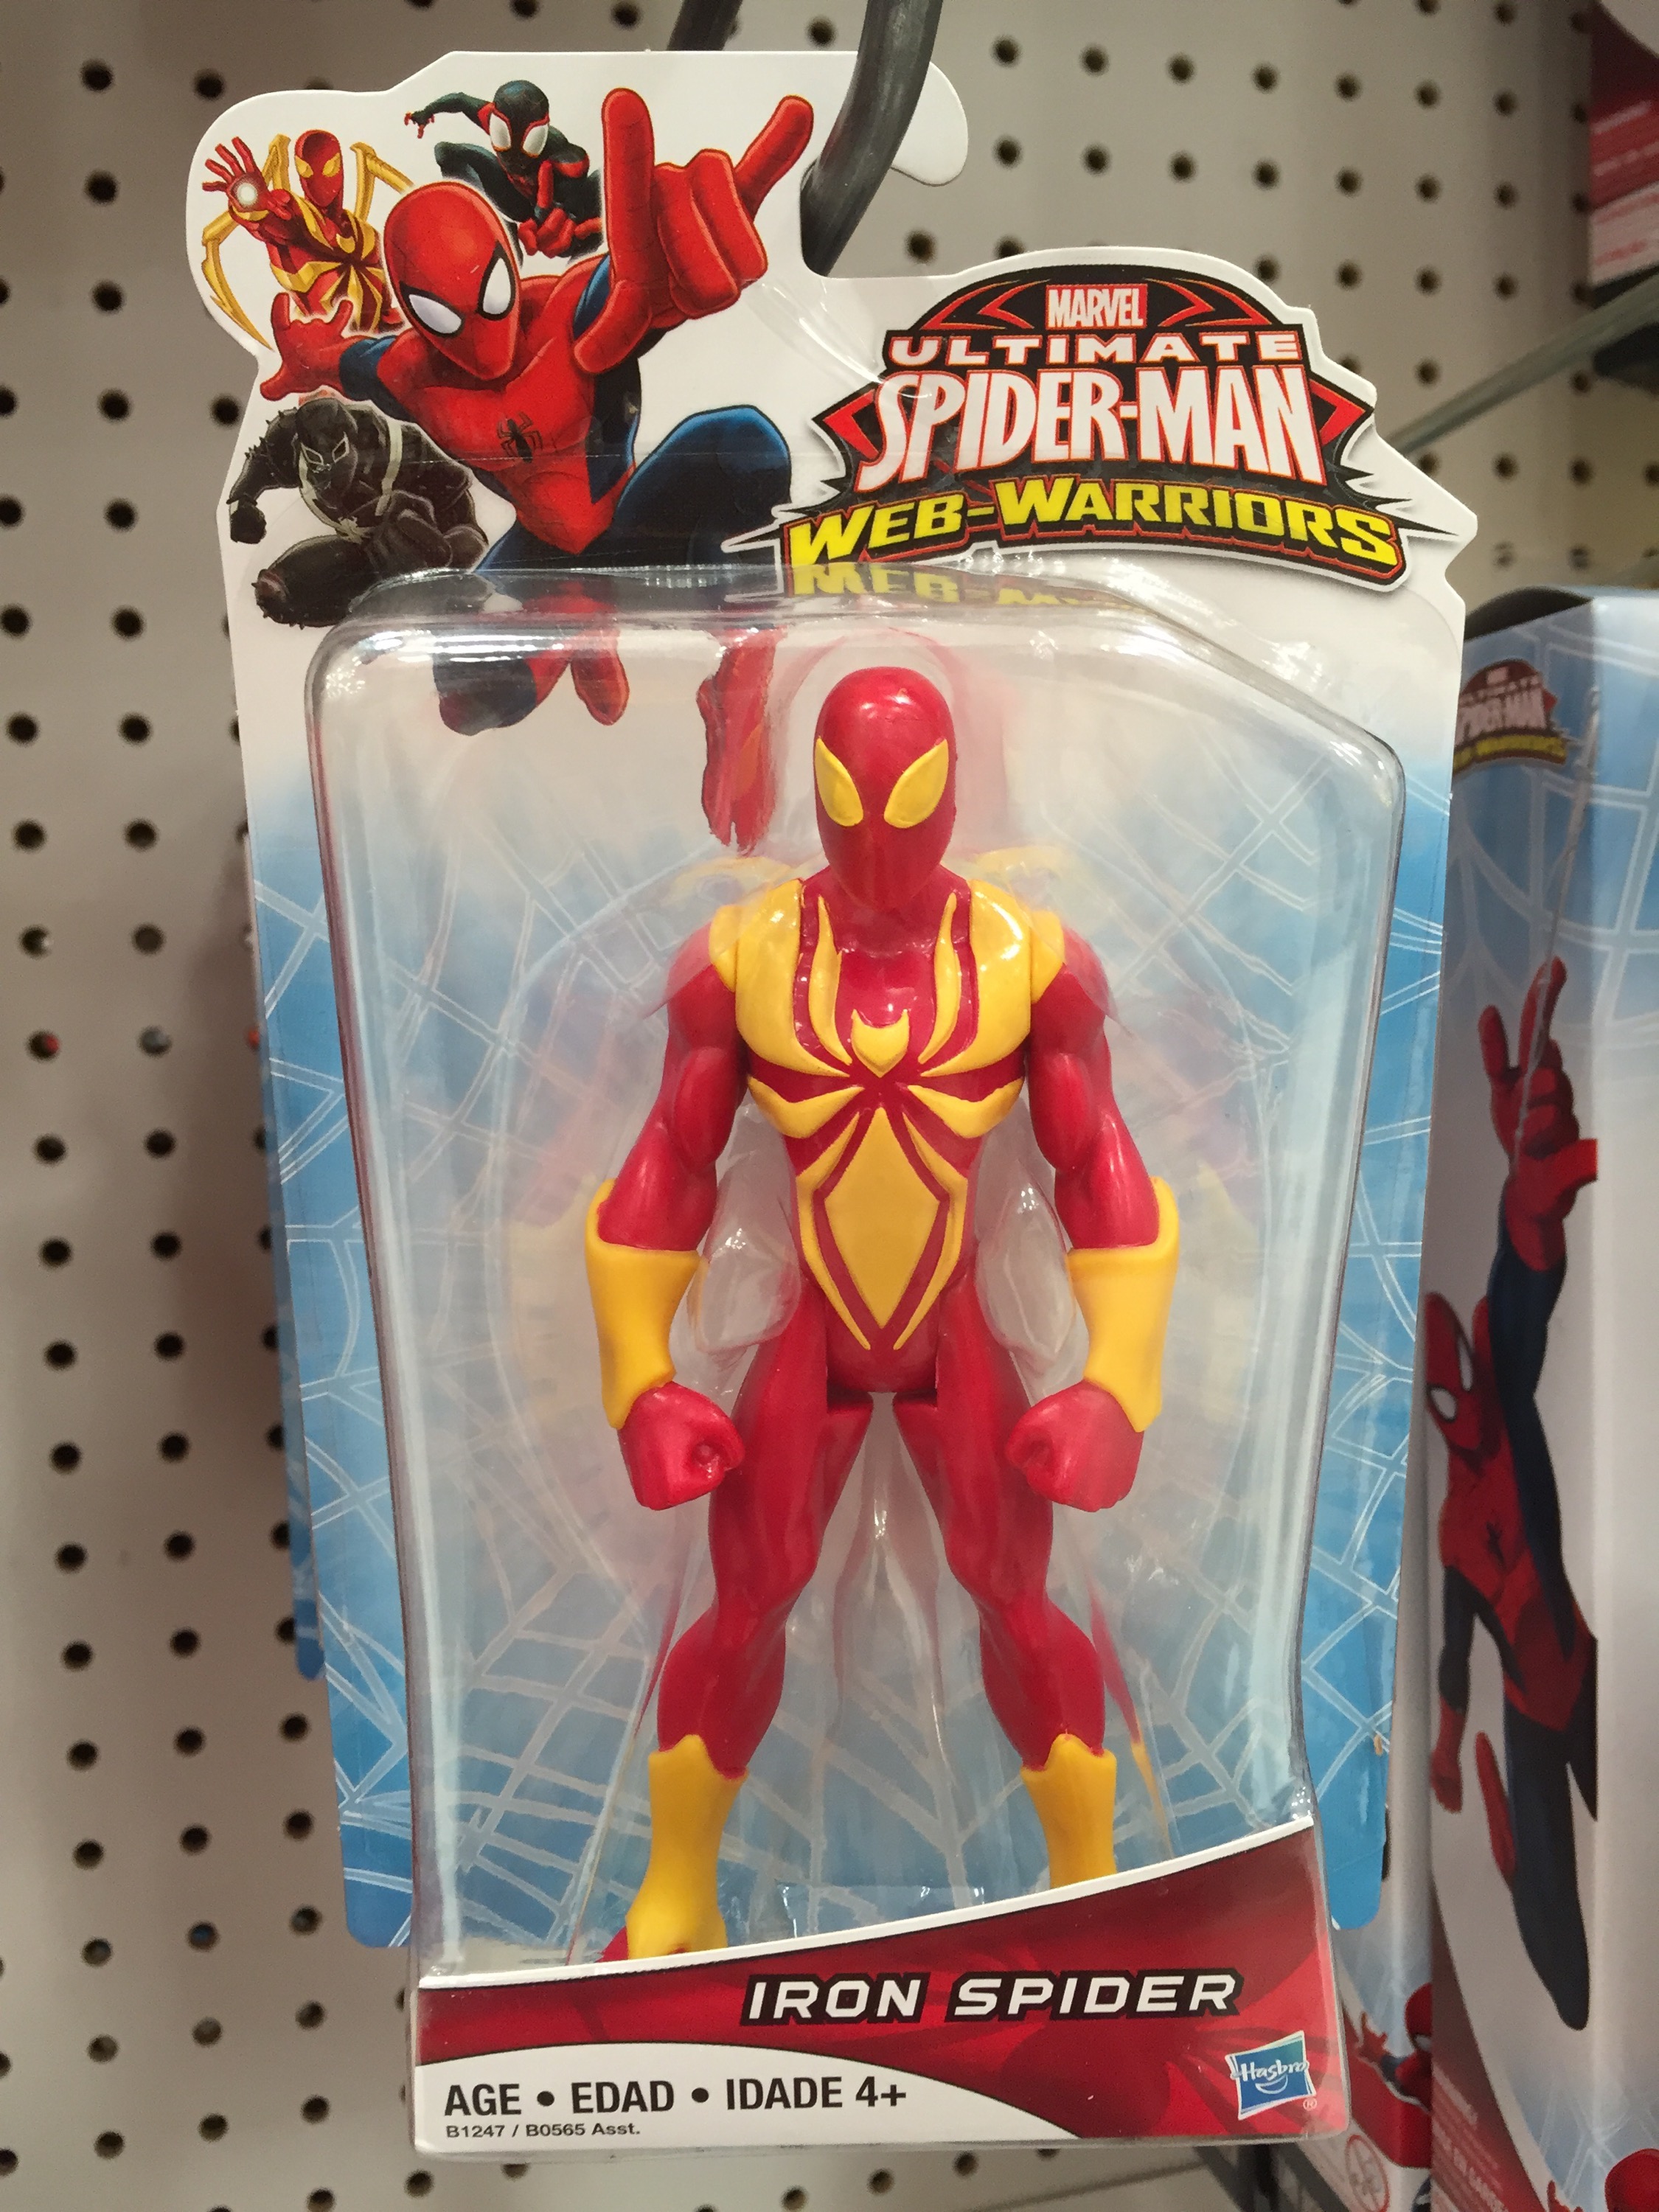 Ultimate Spider-Man Web Warriors Figures Released! - Marvel Toy News